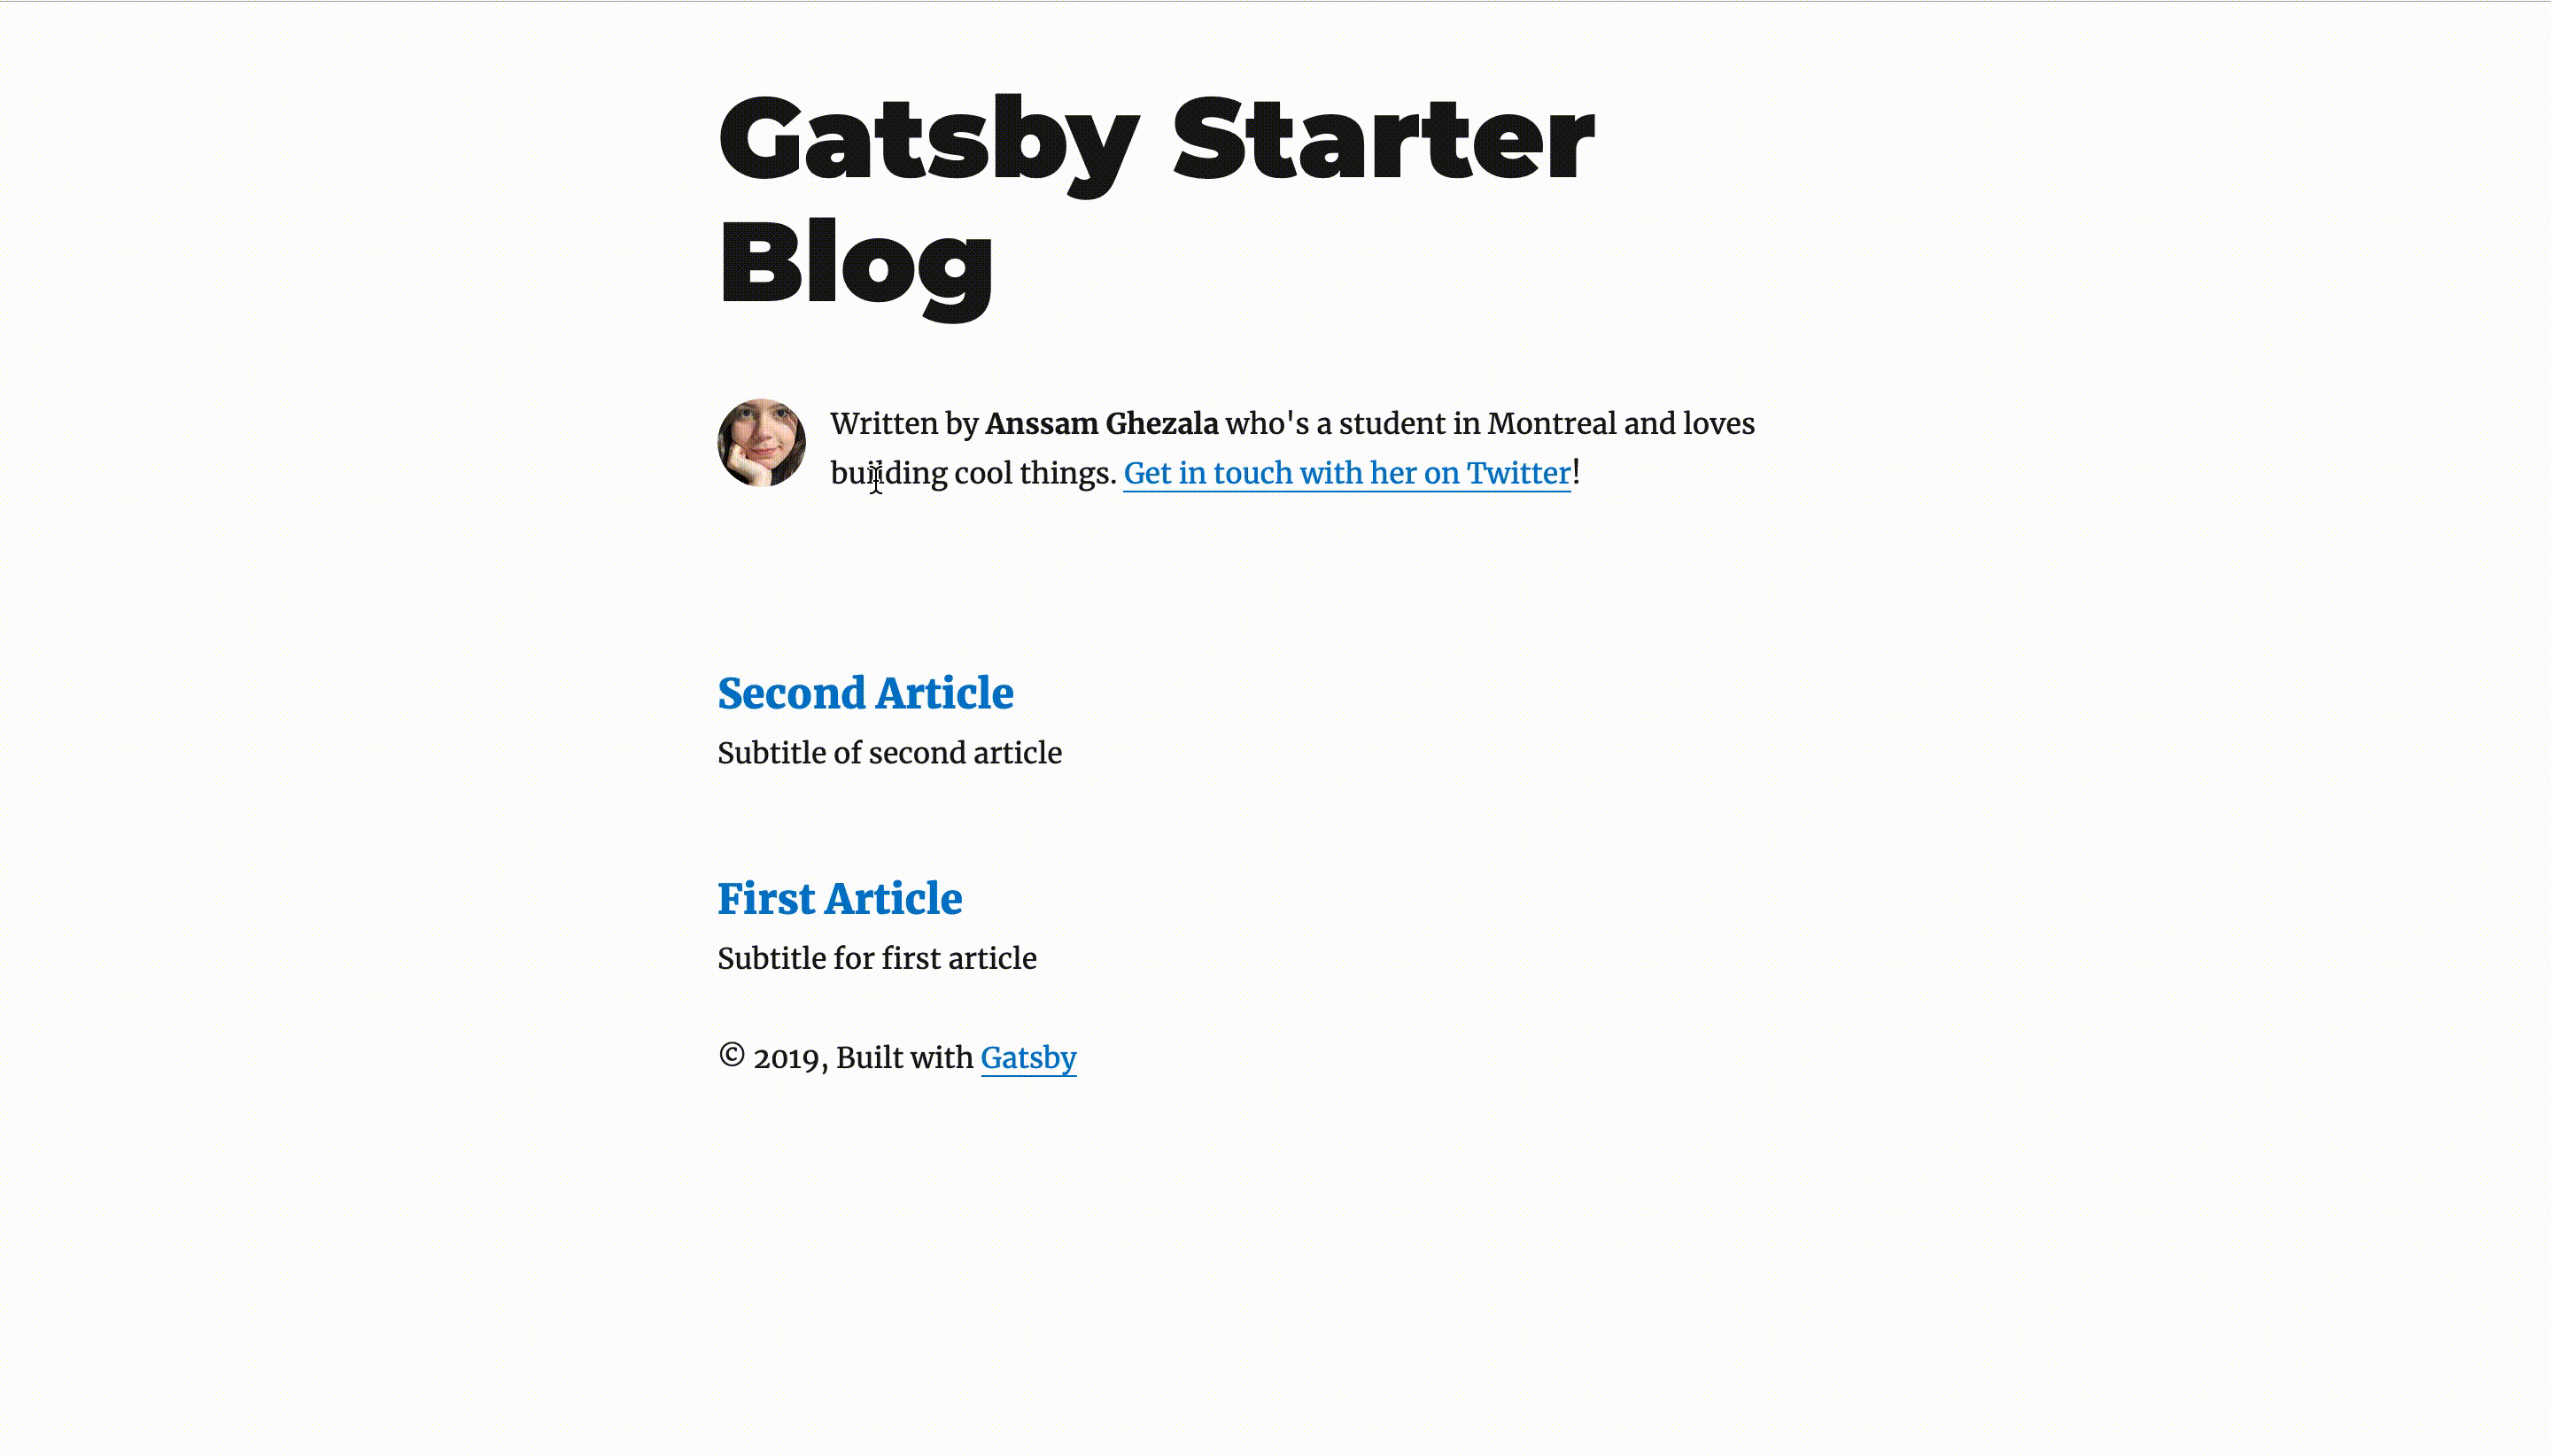 Article pages successfully implemented!